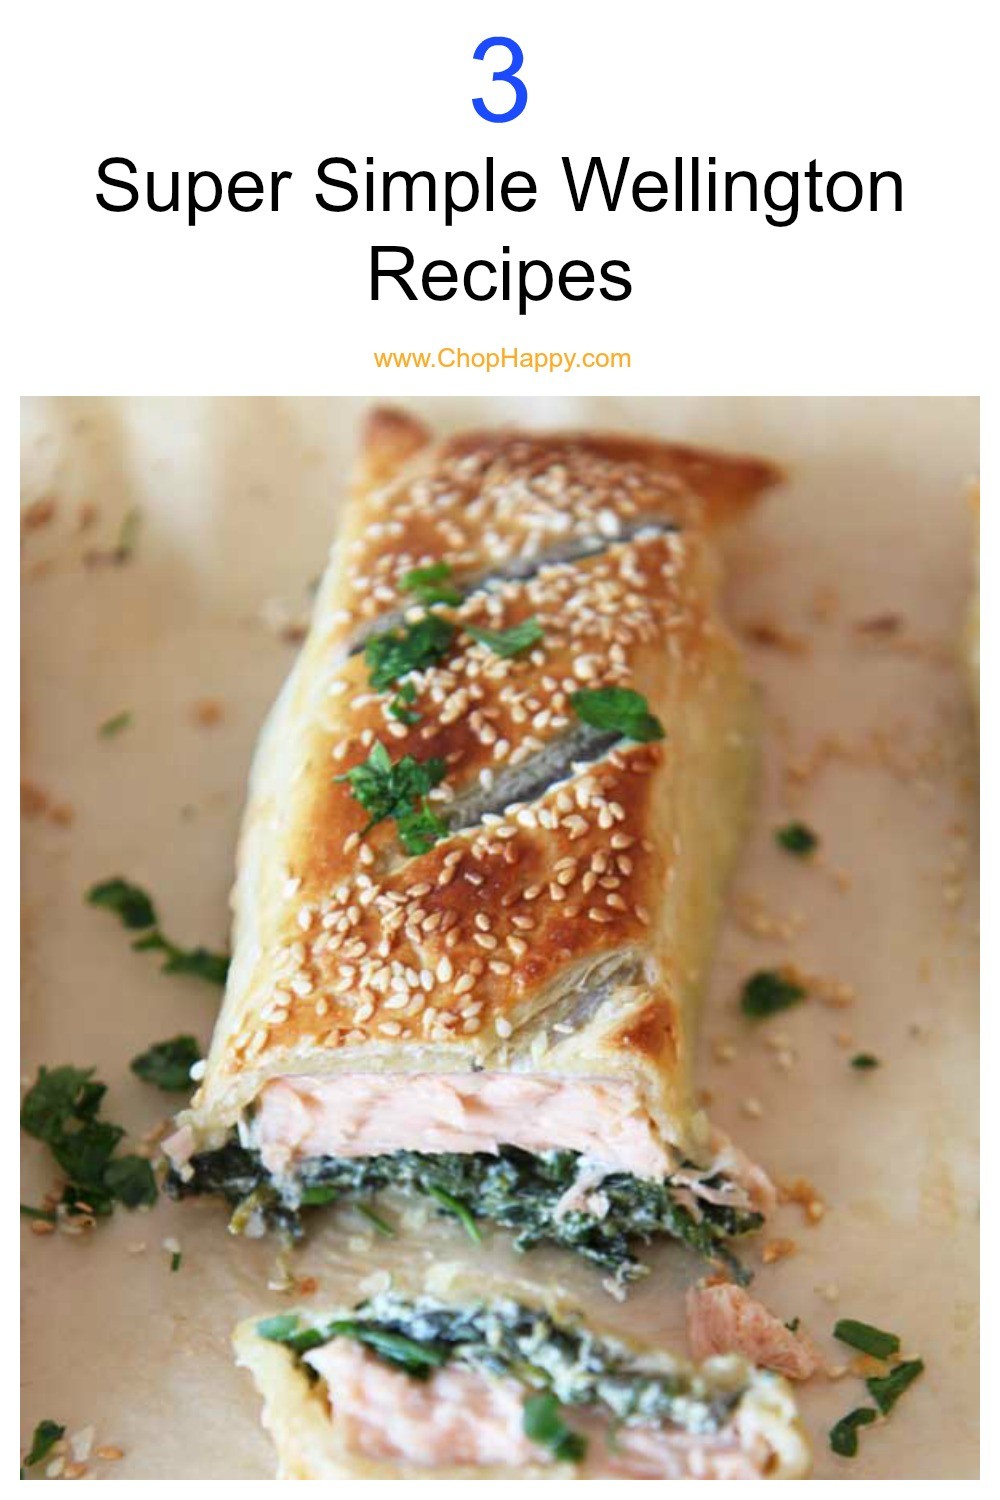 3 Simple Wellington Recipes all done on a sheet pan. All 3 dinner recipes are super easy and wrapped in buttery puff pastry. We have salmon, stuffed mushroom, and traditional beef Wellington. Perfect for holiday parties, dinner parties, or just family dinner time. Happy Cooking! www.ChopHappy.com #BeefWellington #sheetpandinner